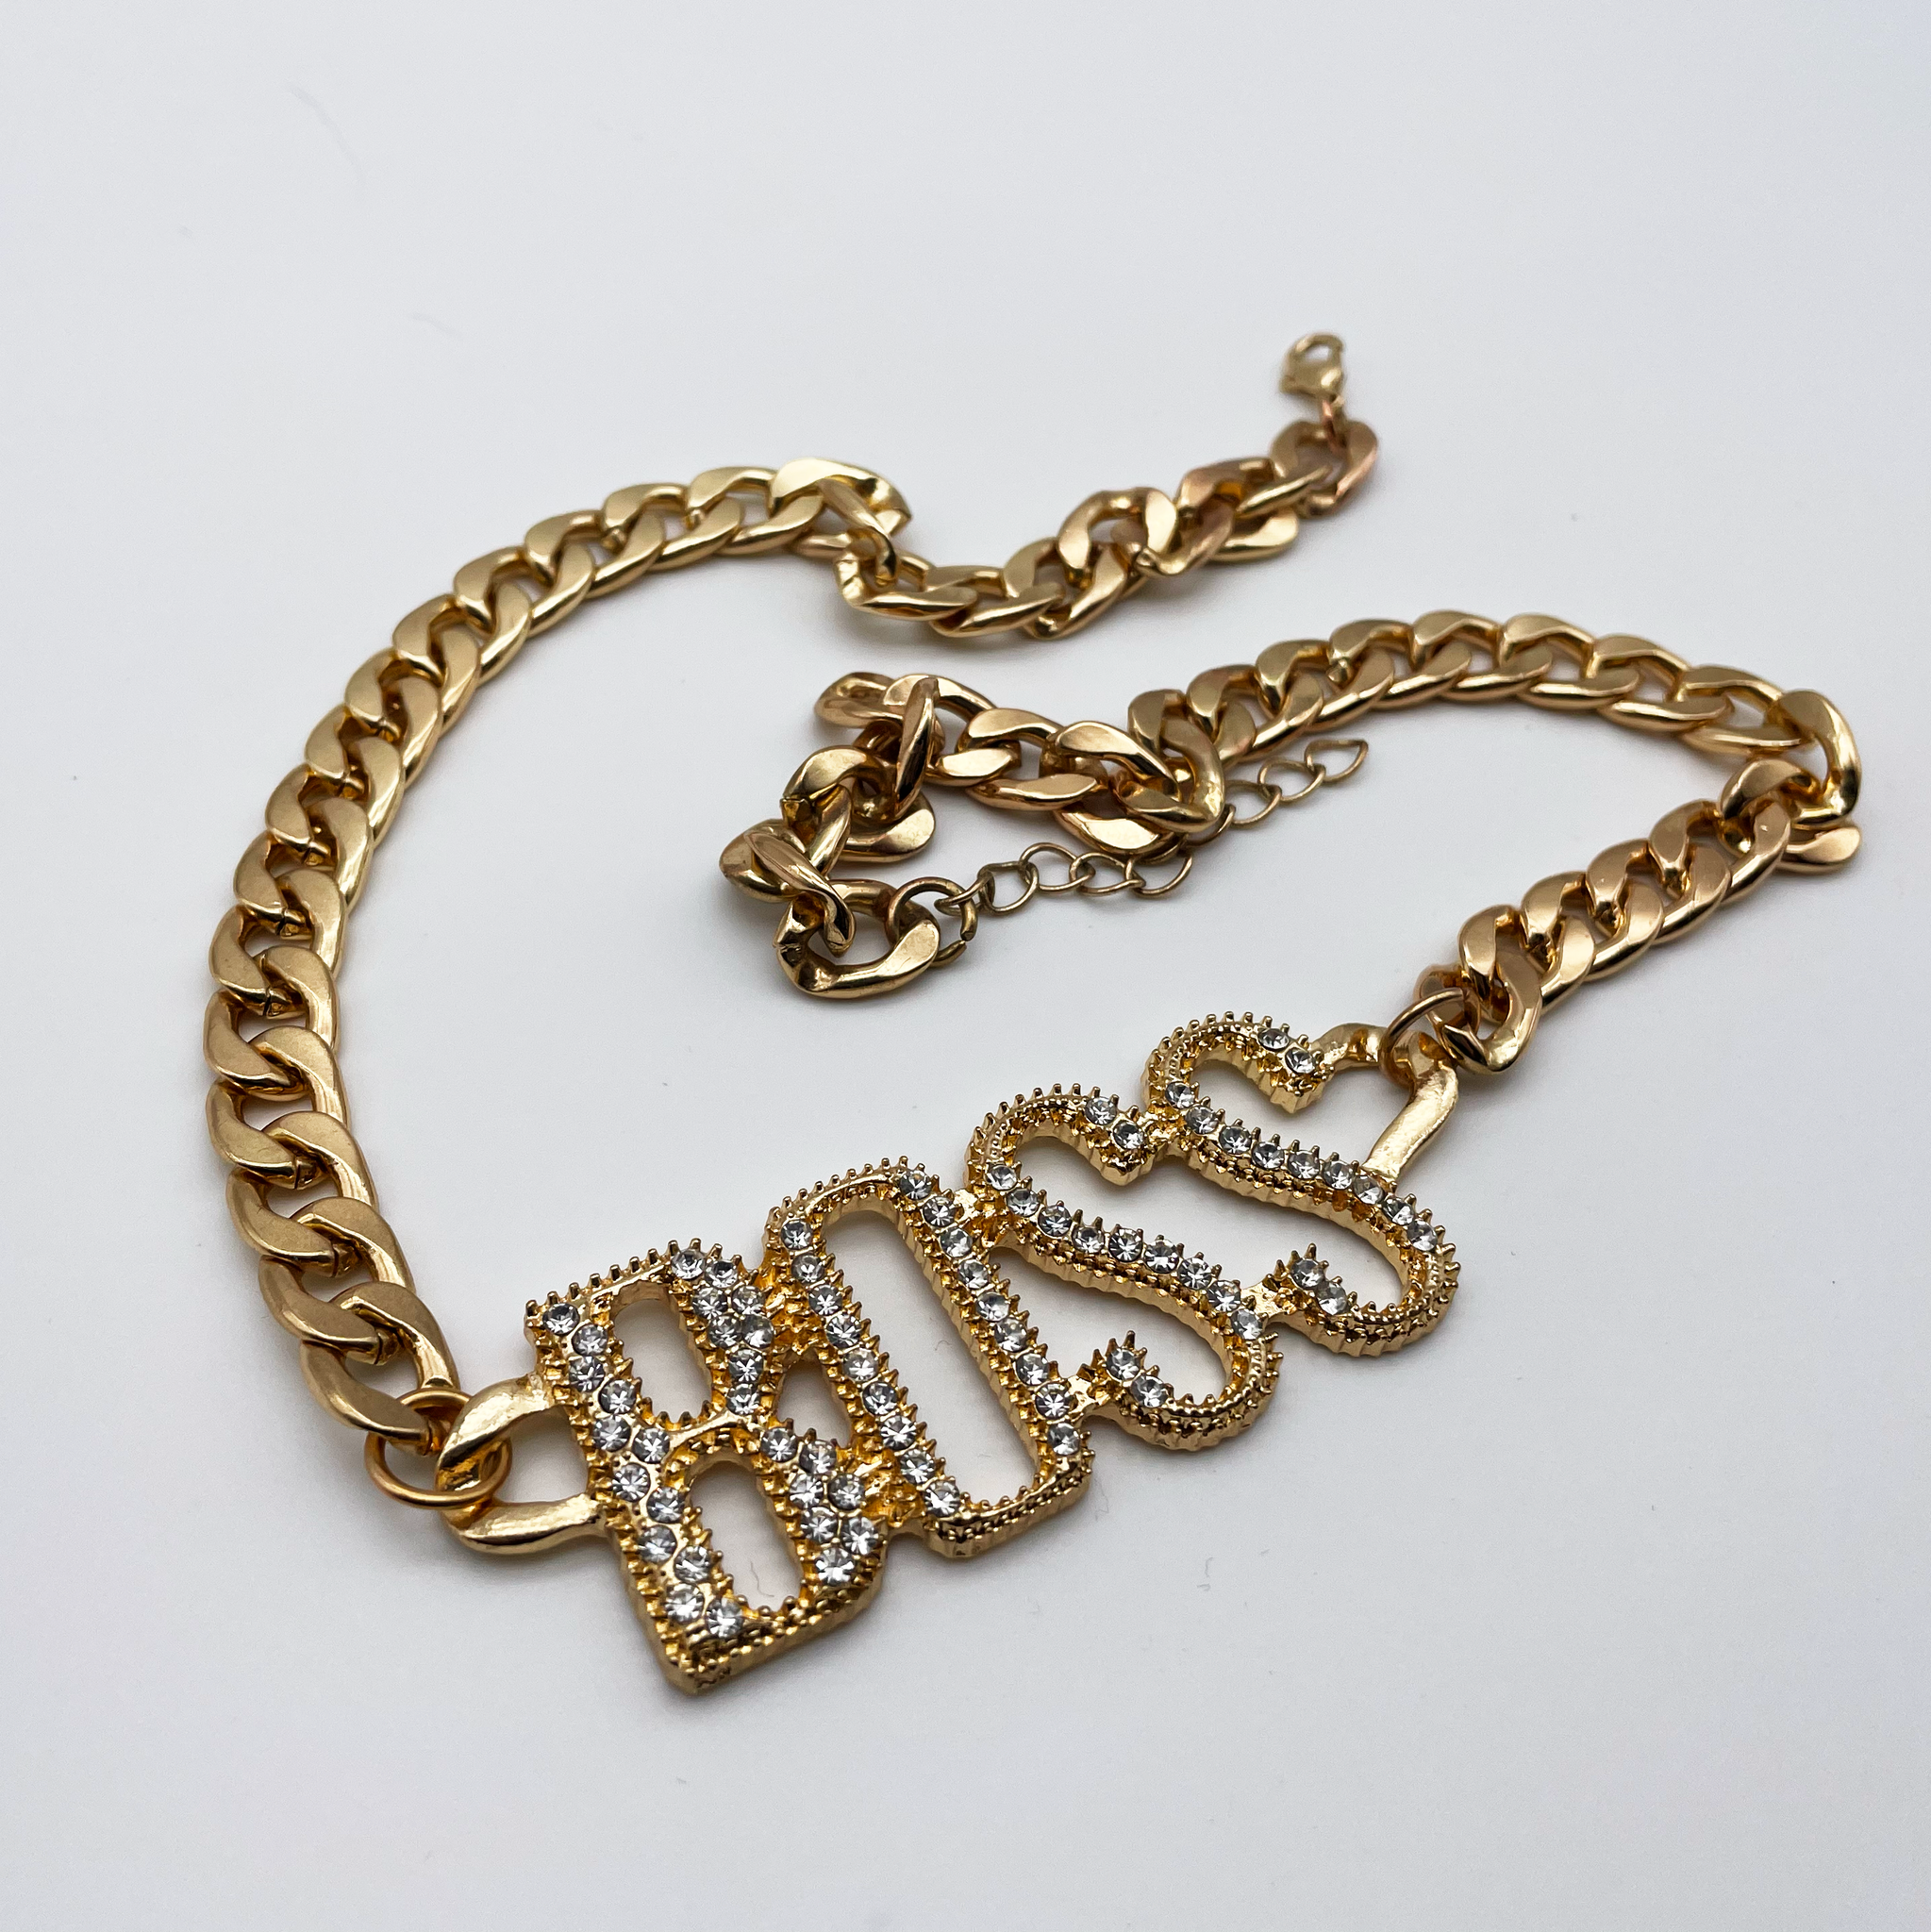 Hugo Boss Chains For Him Gold Tone Necklace|1580173|Peter Jackson the  Jeweller